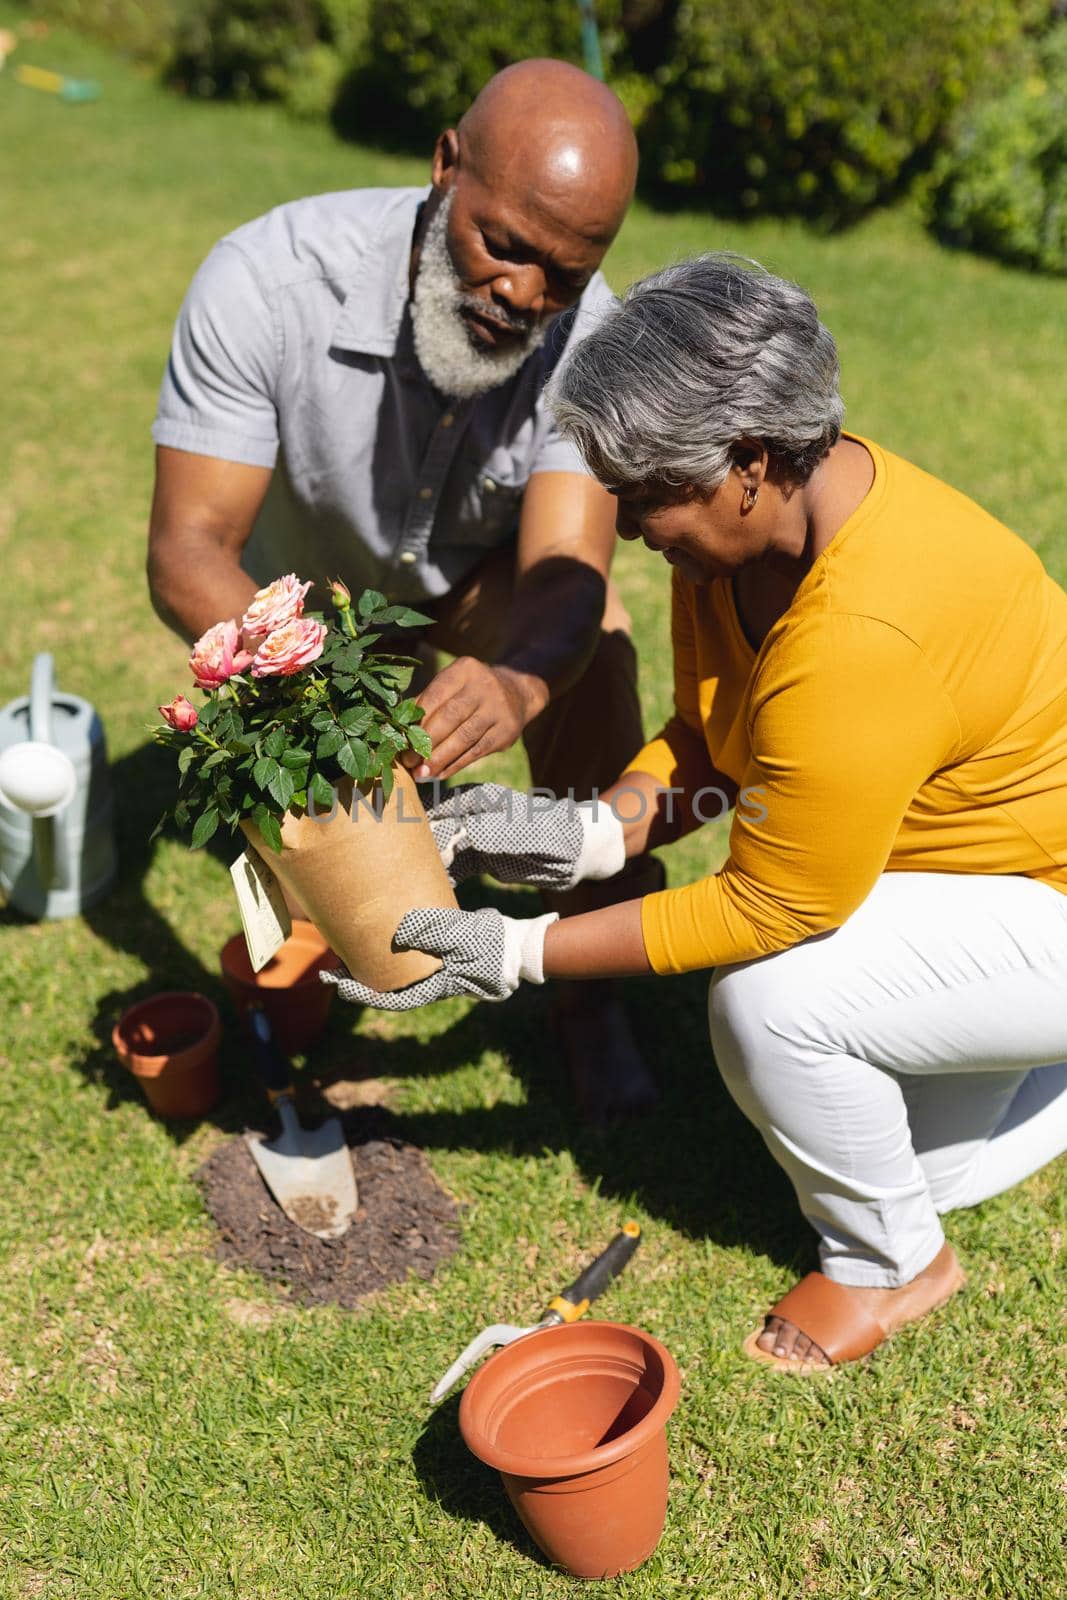 Senior african american couple spending time in sunny garden together planting flowers. retreat, retirement and happy senior lifestyle concept.